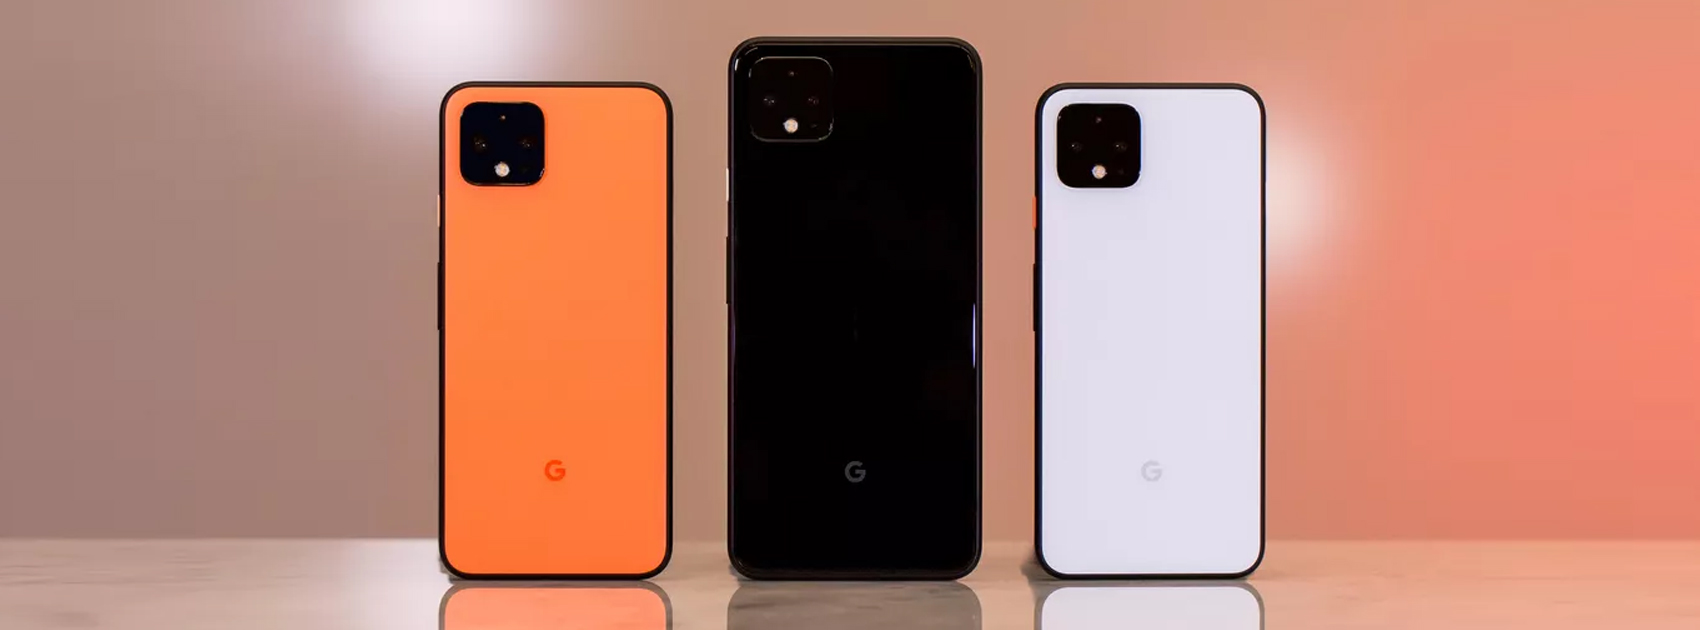 Why Google Will Not Launch Pixel 4 In India,Startup Stories,Latest Technology News 2019,Google Pixel 4,Google Pixel 4 in India,Google Pixel 4 best feature,Google Pixel 4 not launching in India,Pixel 4 in India,world fastest growing smartphone market